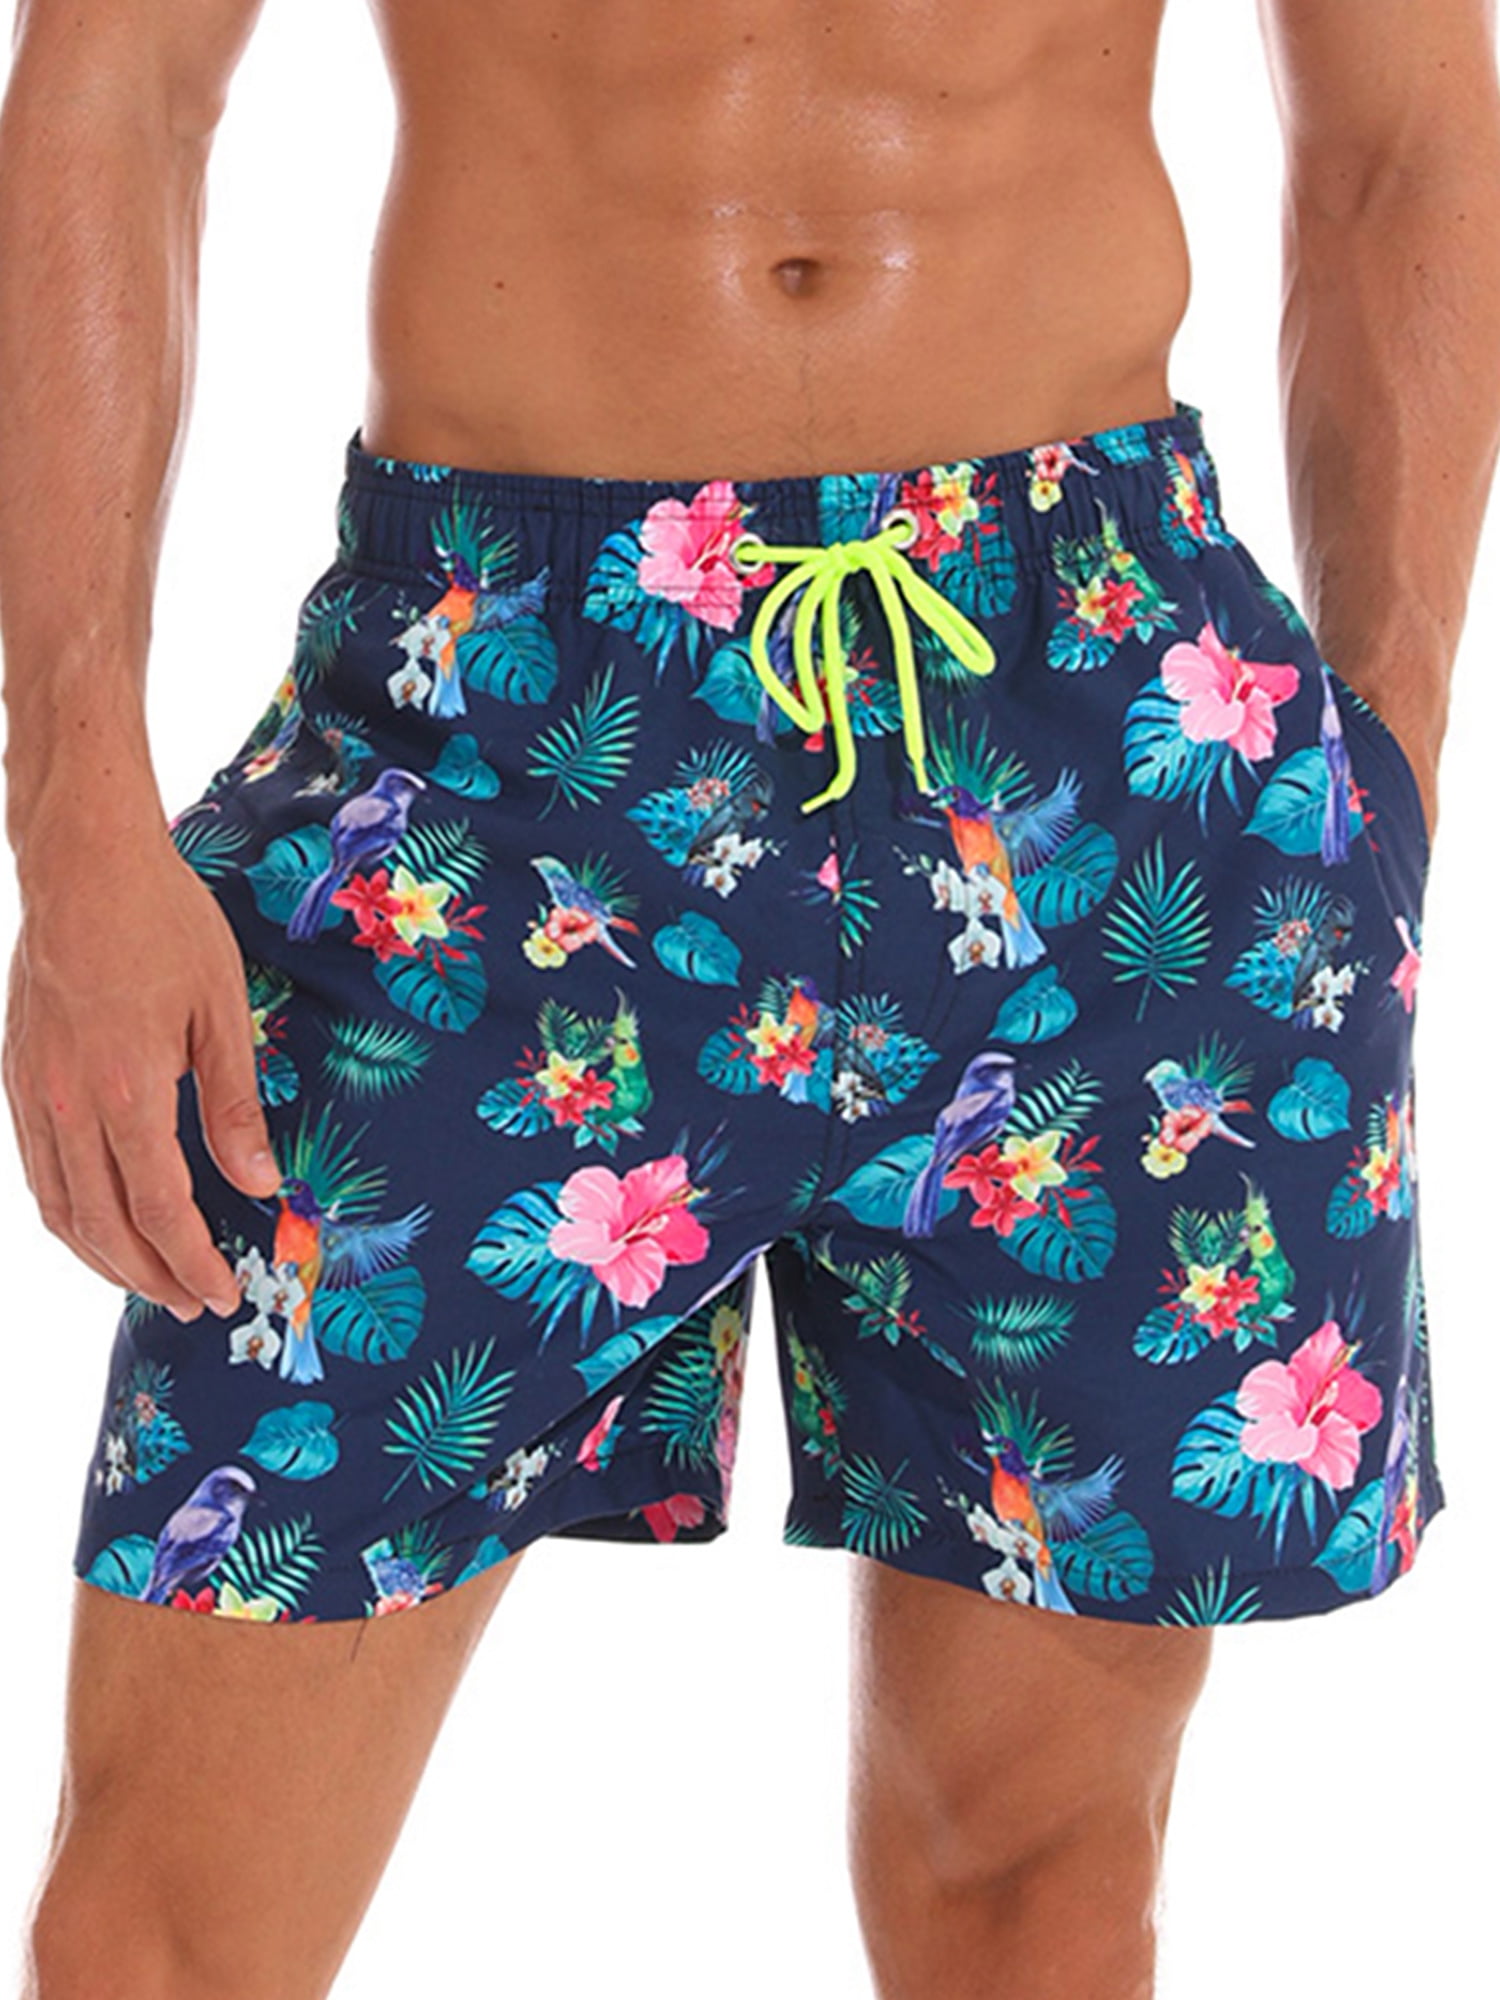 Leisue Summer Floral Quick Dry Elastic Lace Boardshorts Beach Shorts Pants Swim Trunks Male Swimsuit with Pockets